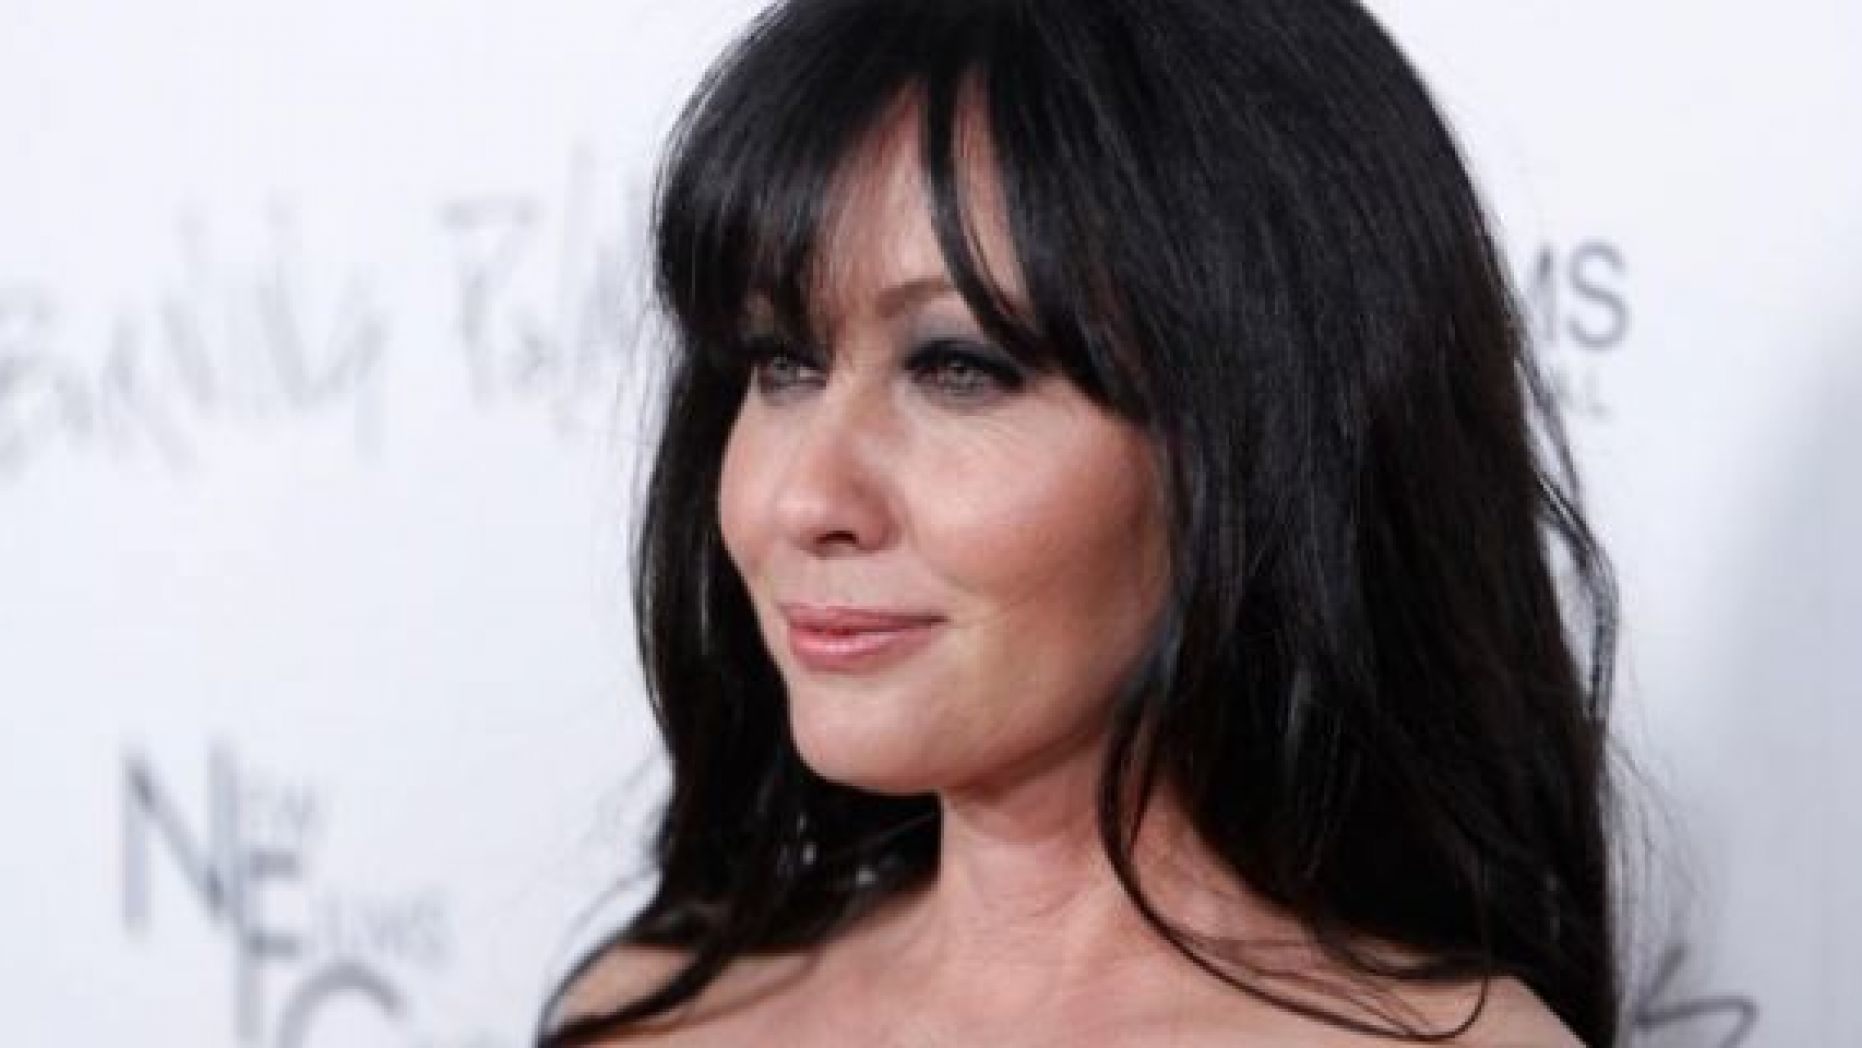 Actress Shannen Doherty opened up to Health magazine about her battle with breast cancer for the outlet's March cover issue.